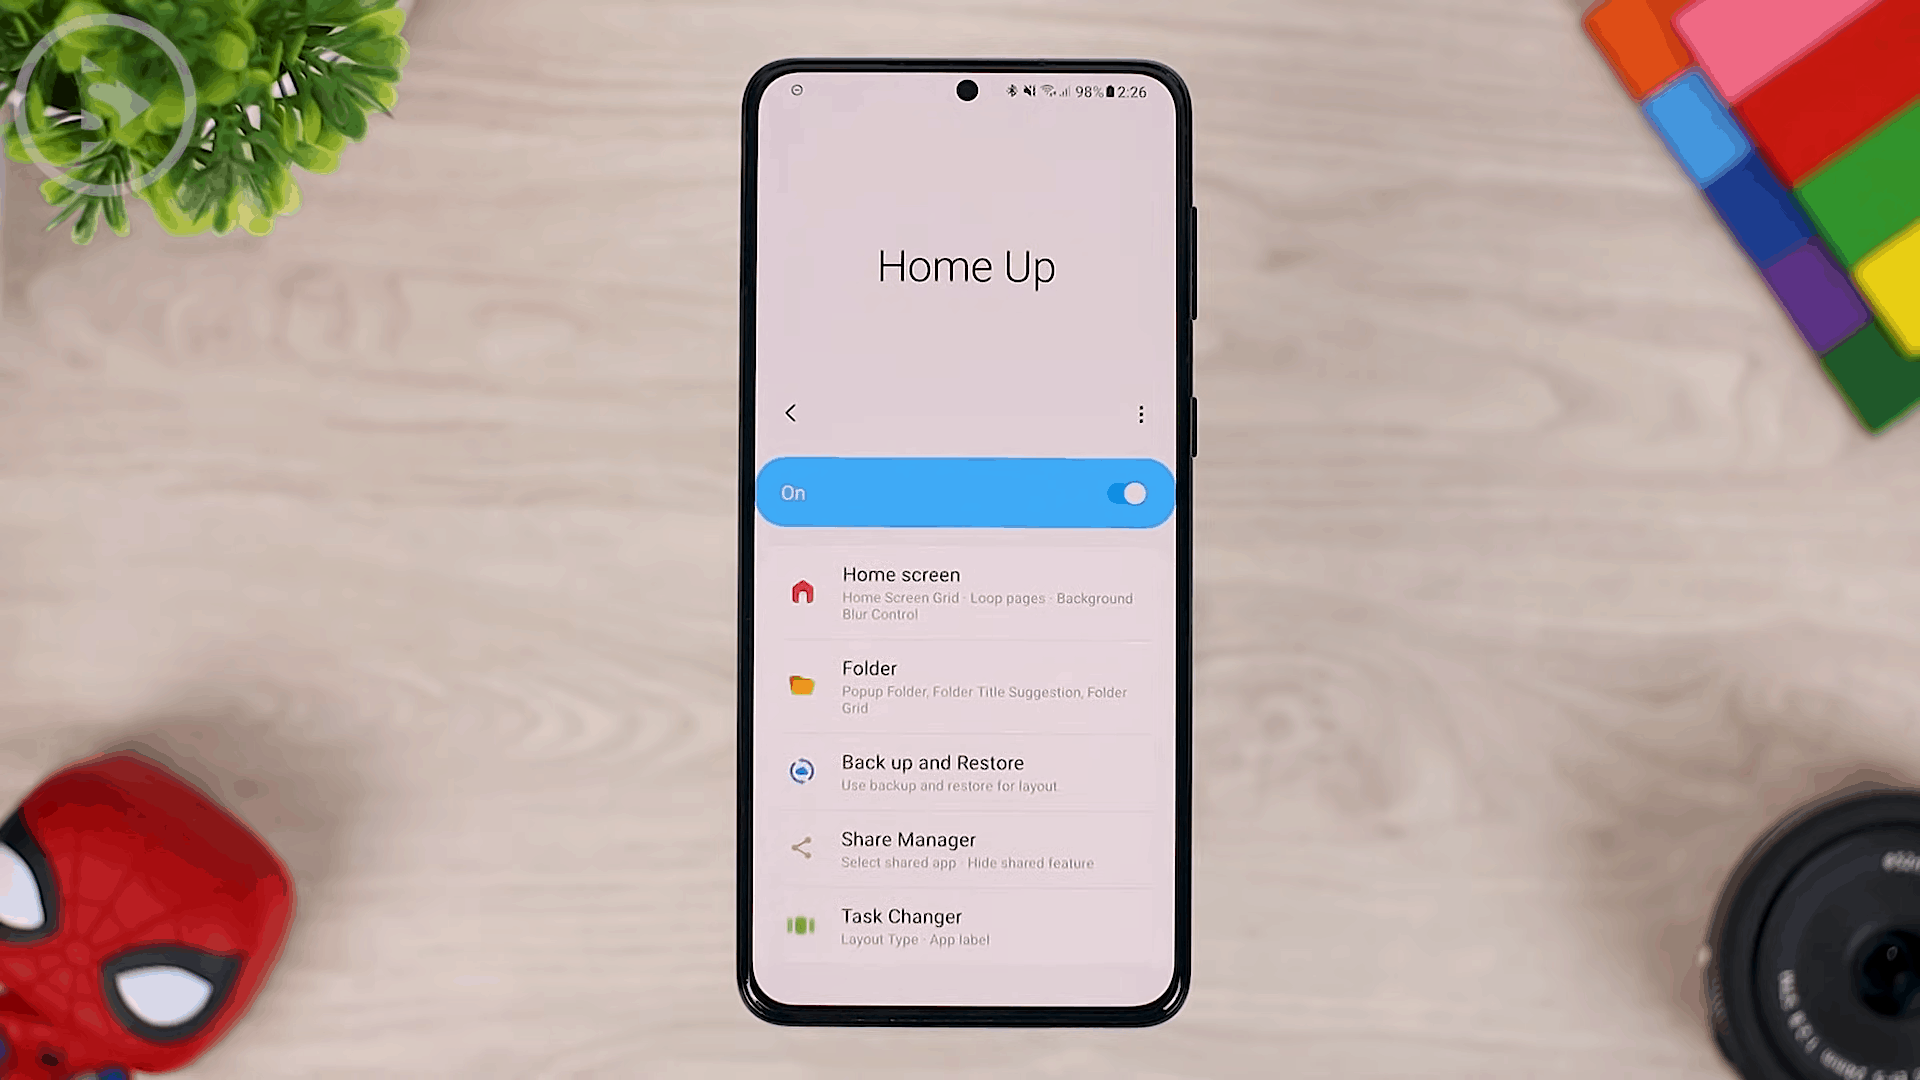 New Task Changer Animation and Layout Types - 8 COOL Features in the LATEST Good Lock Update April 2021